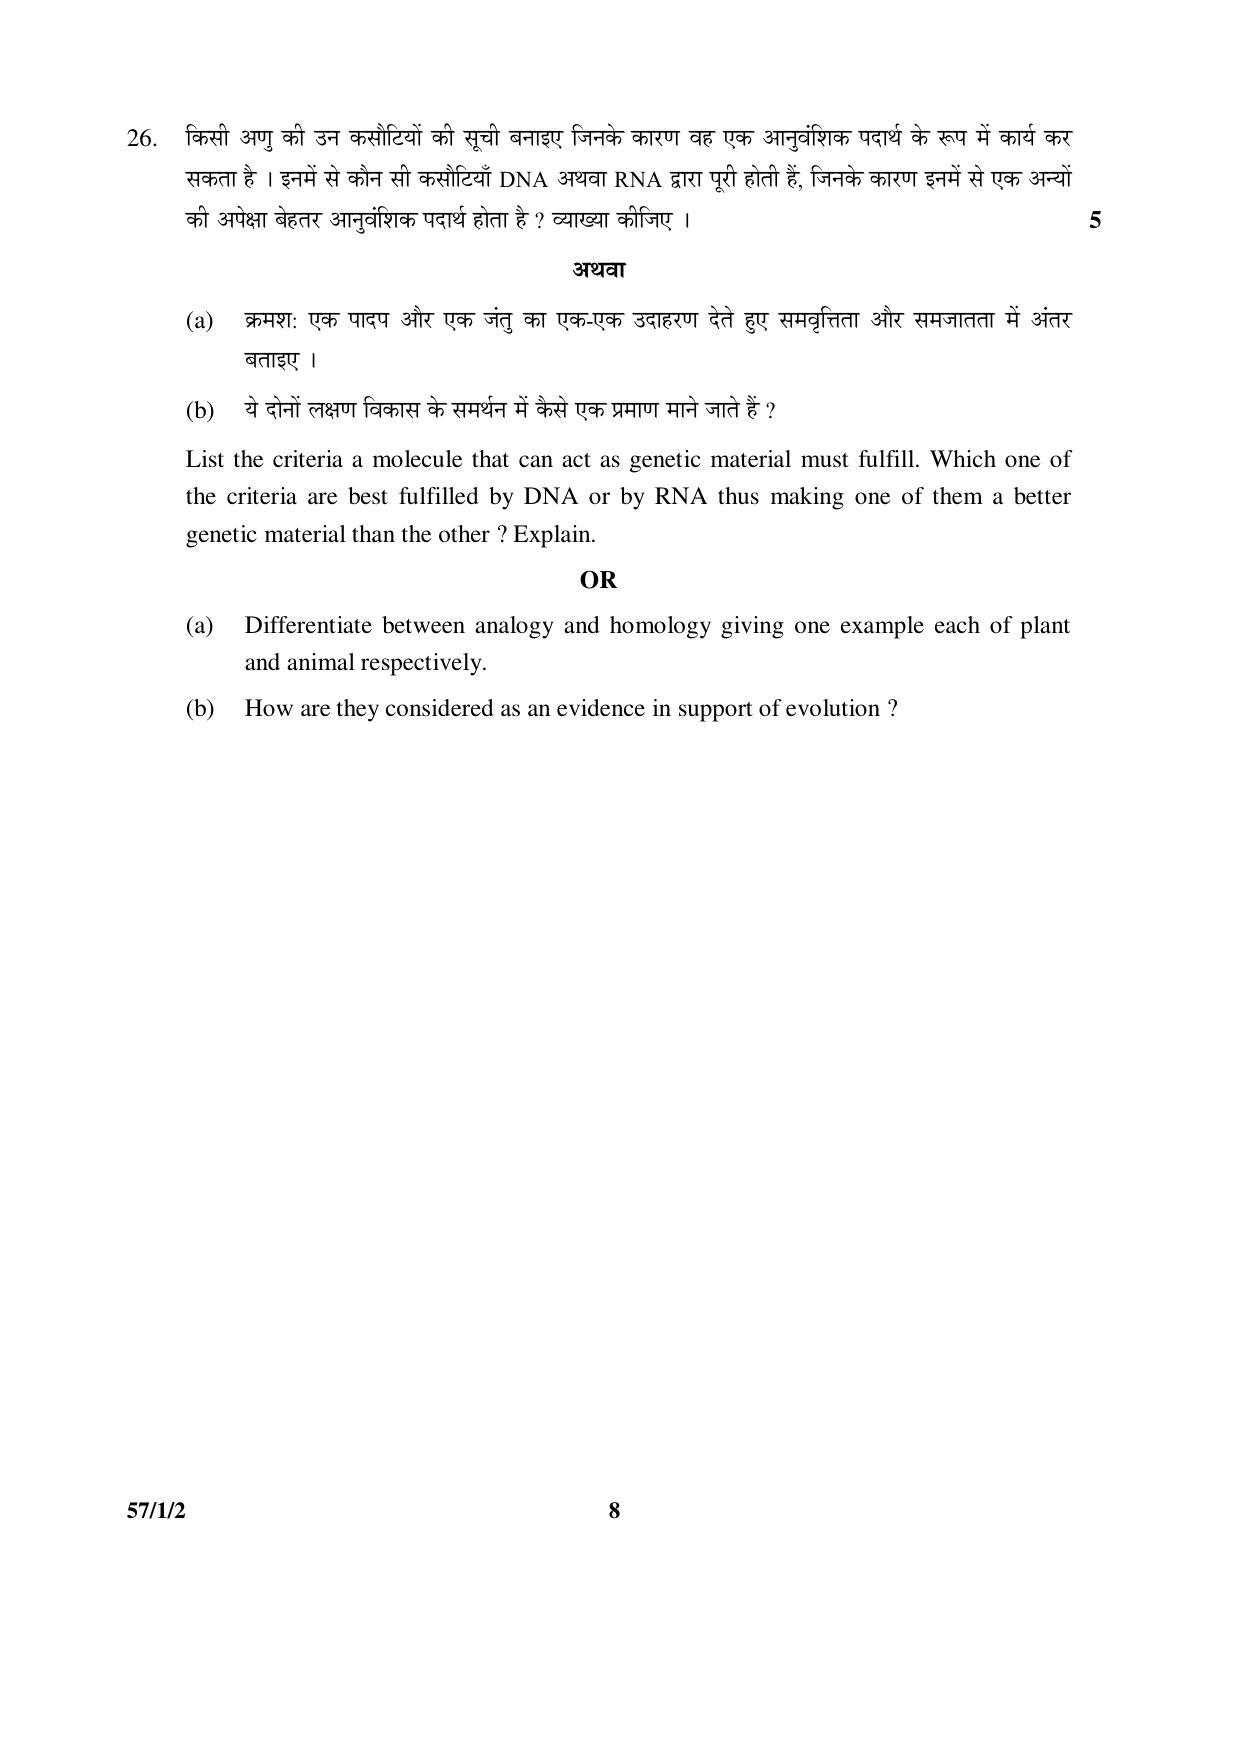 CBSE Class 12 57-1-2 BIOLOGY 2016 Question Paper - Page 8